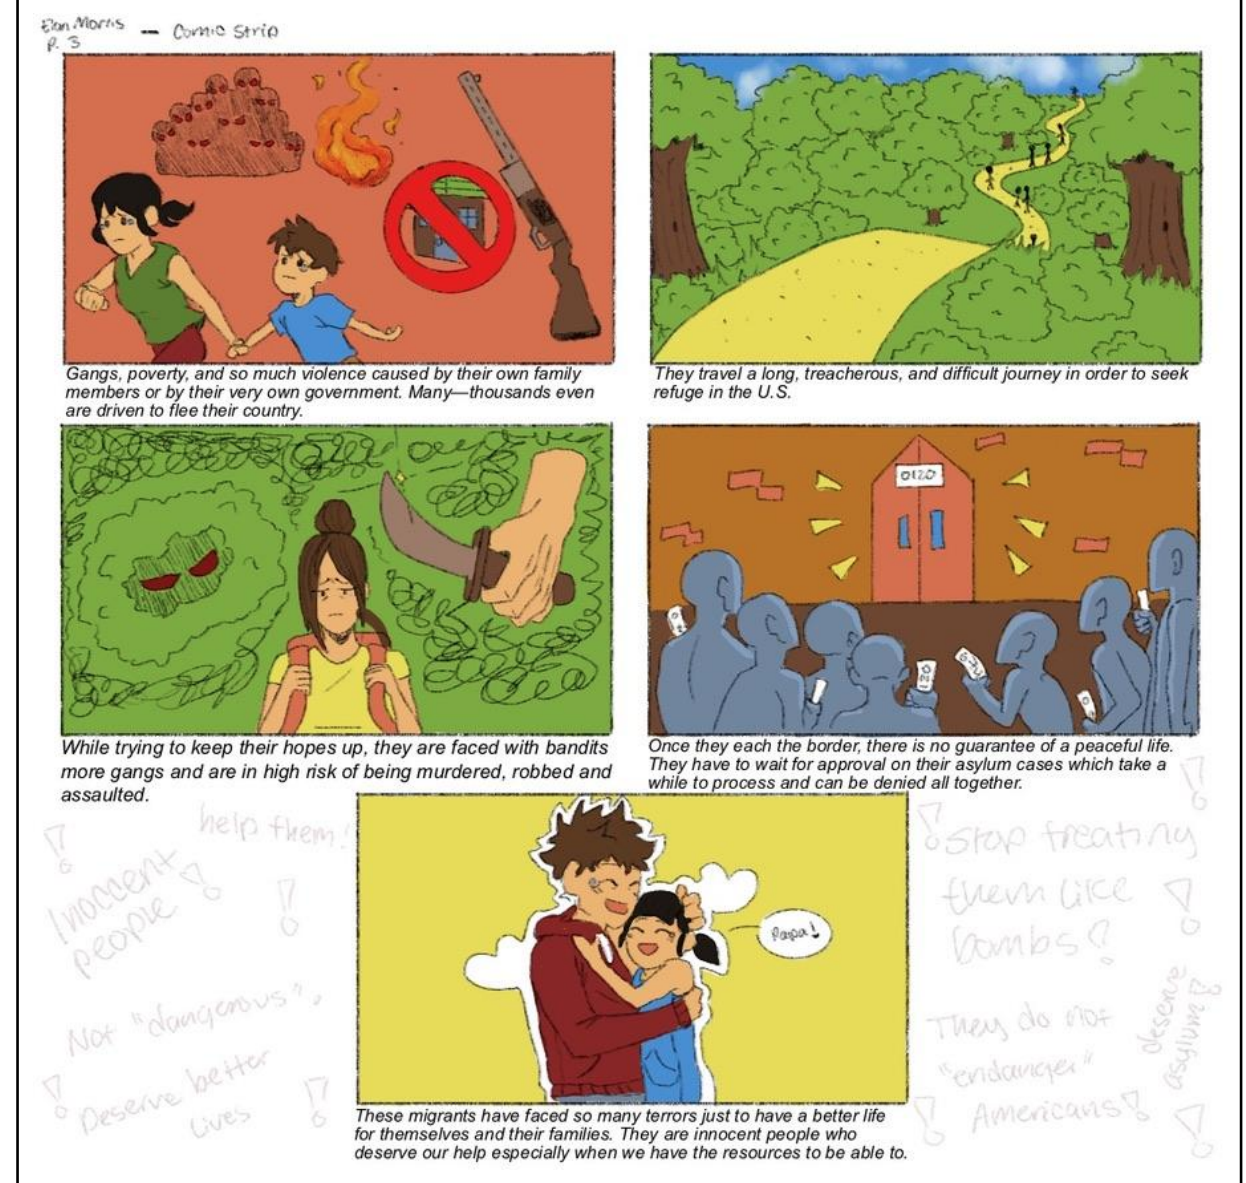 Student work sample: A comic strip detailing the experiences of youth migrants 